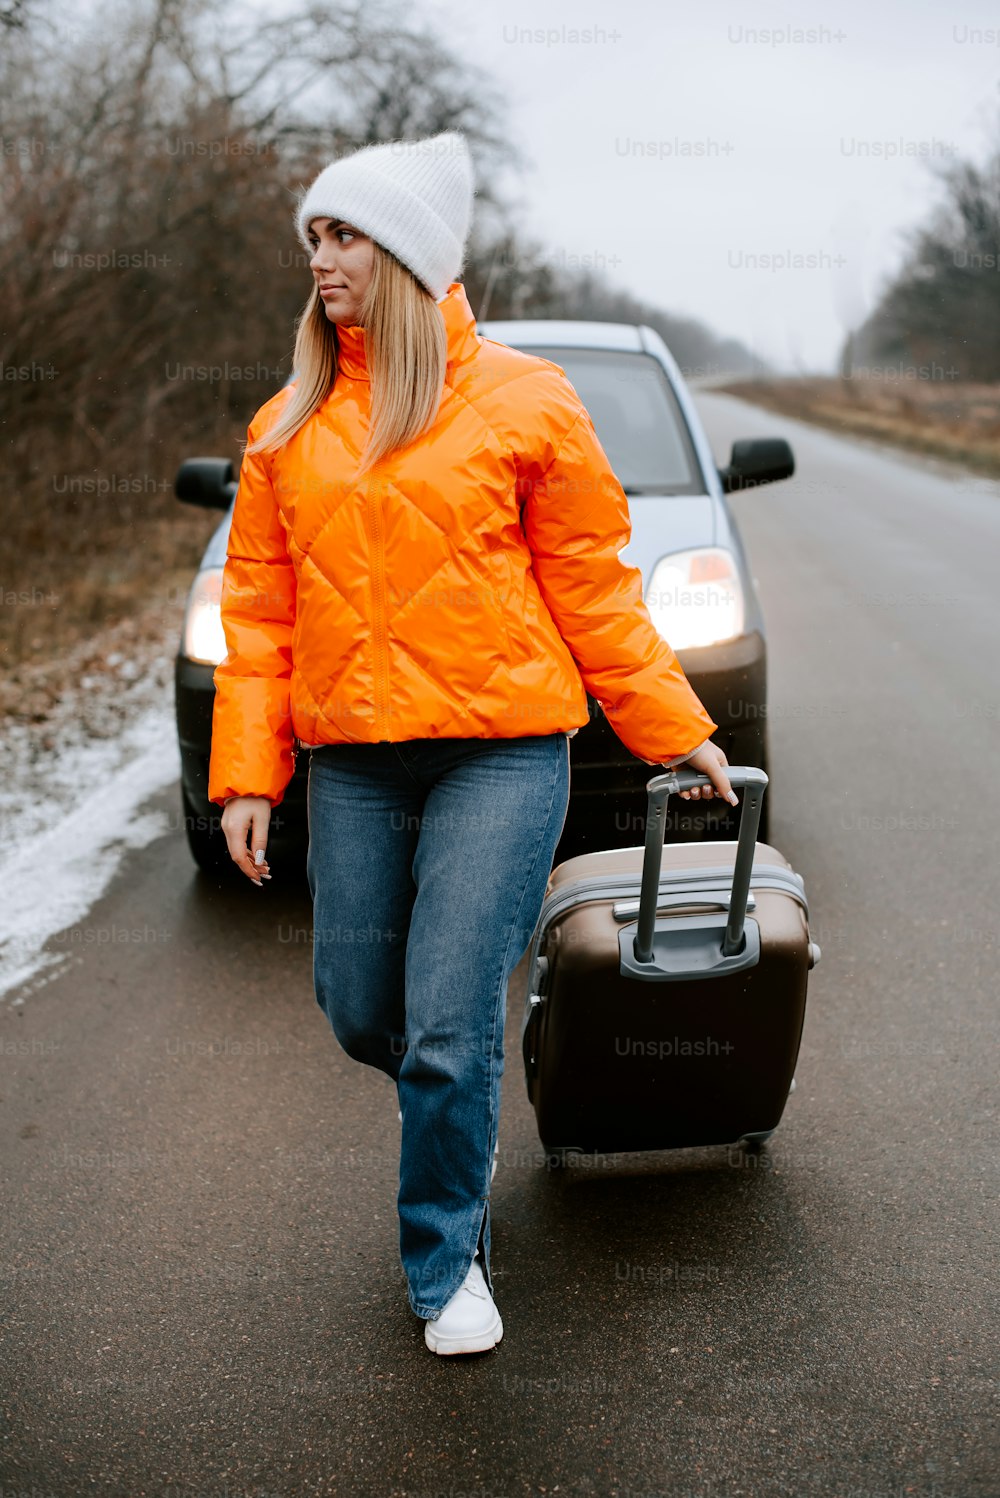 a woman walking down a road with a suitcase